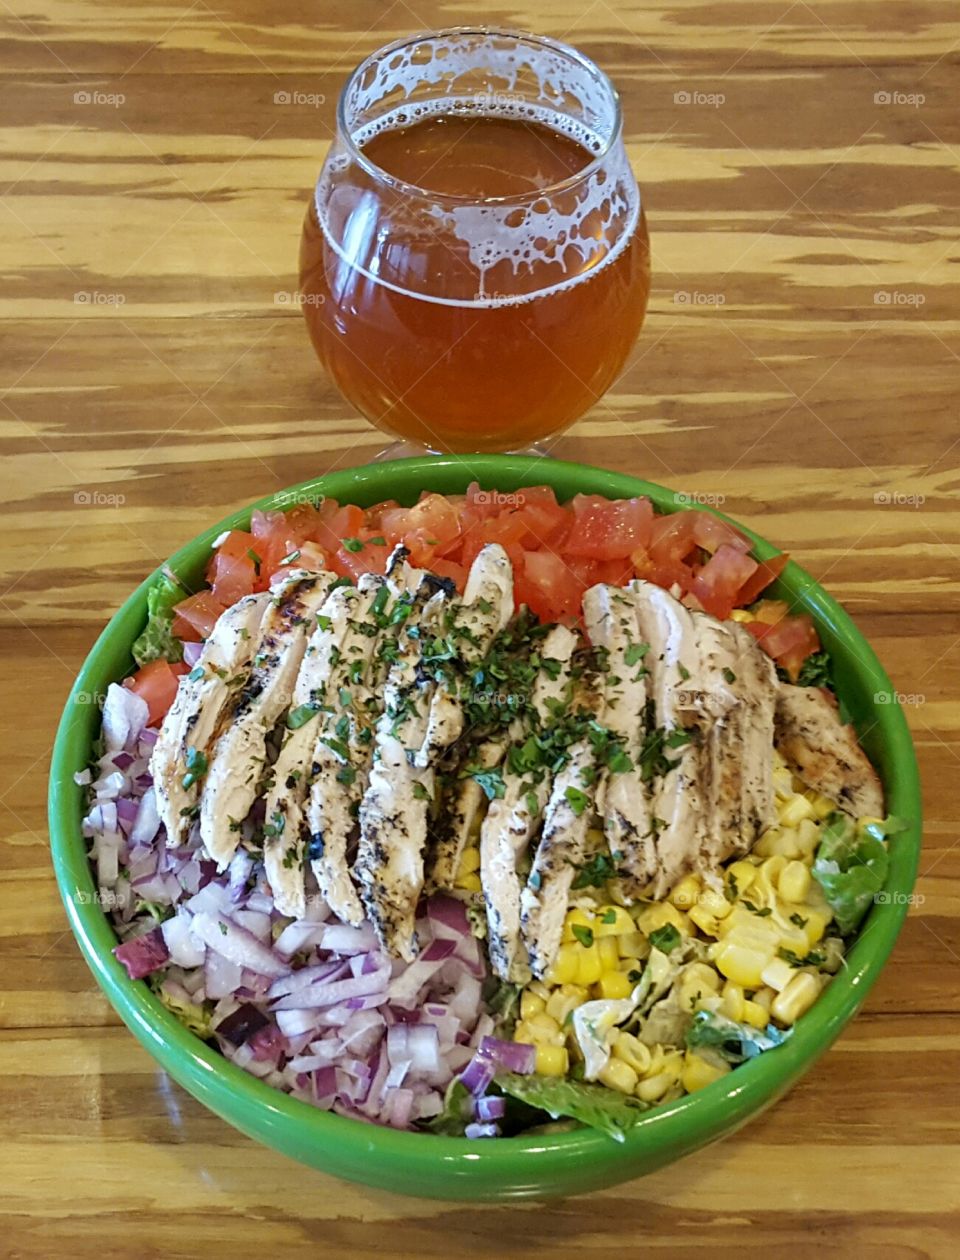 Delicious Salad & Beer at Beer Research Institute